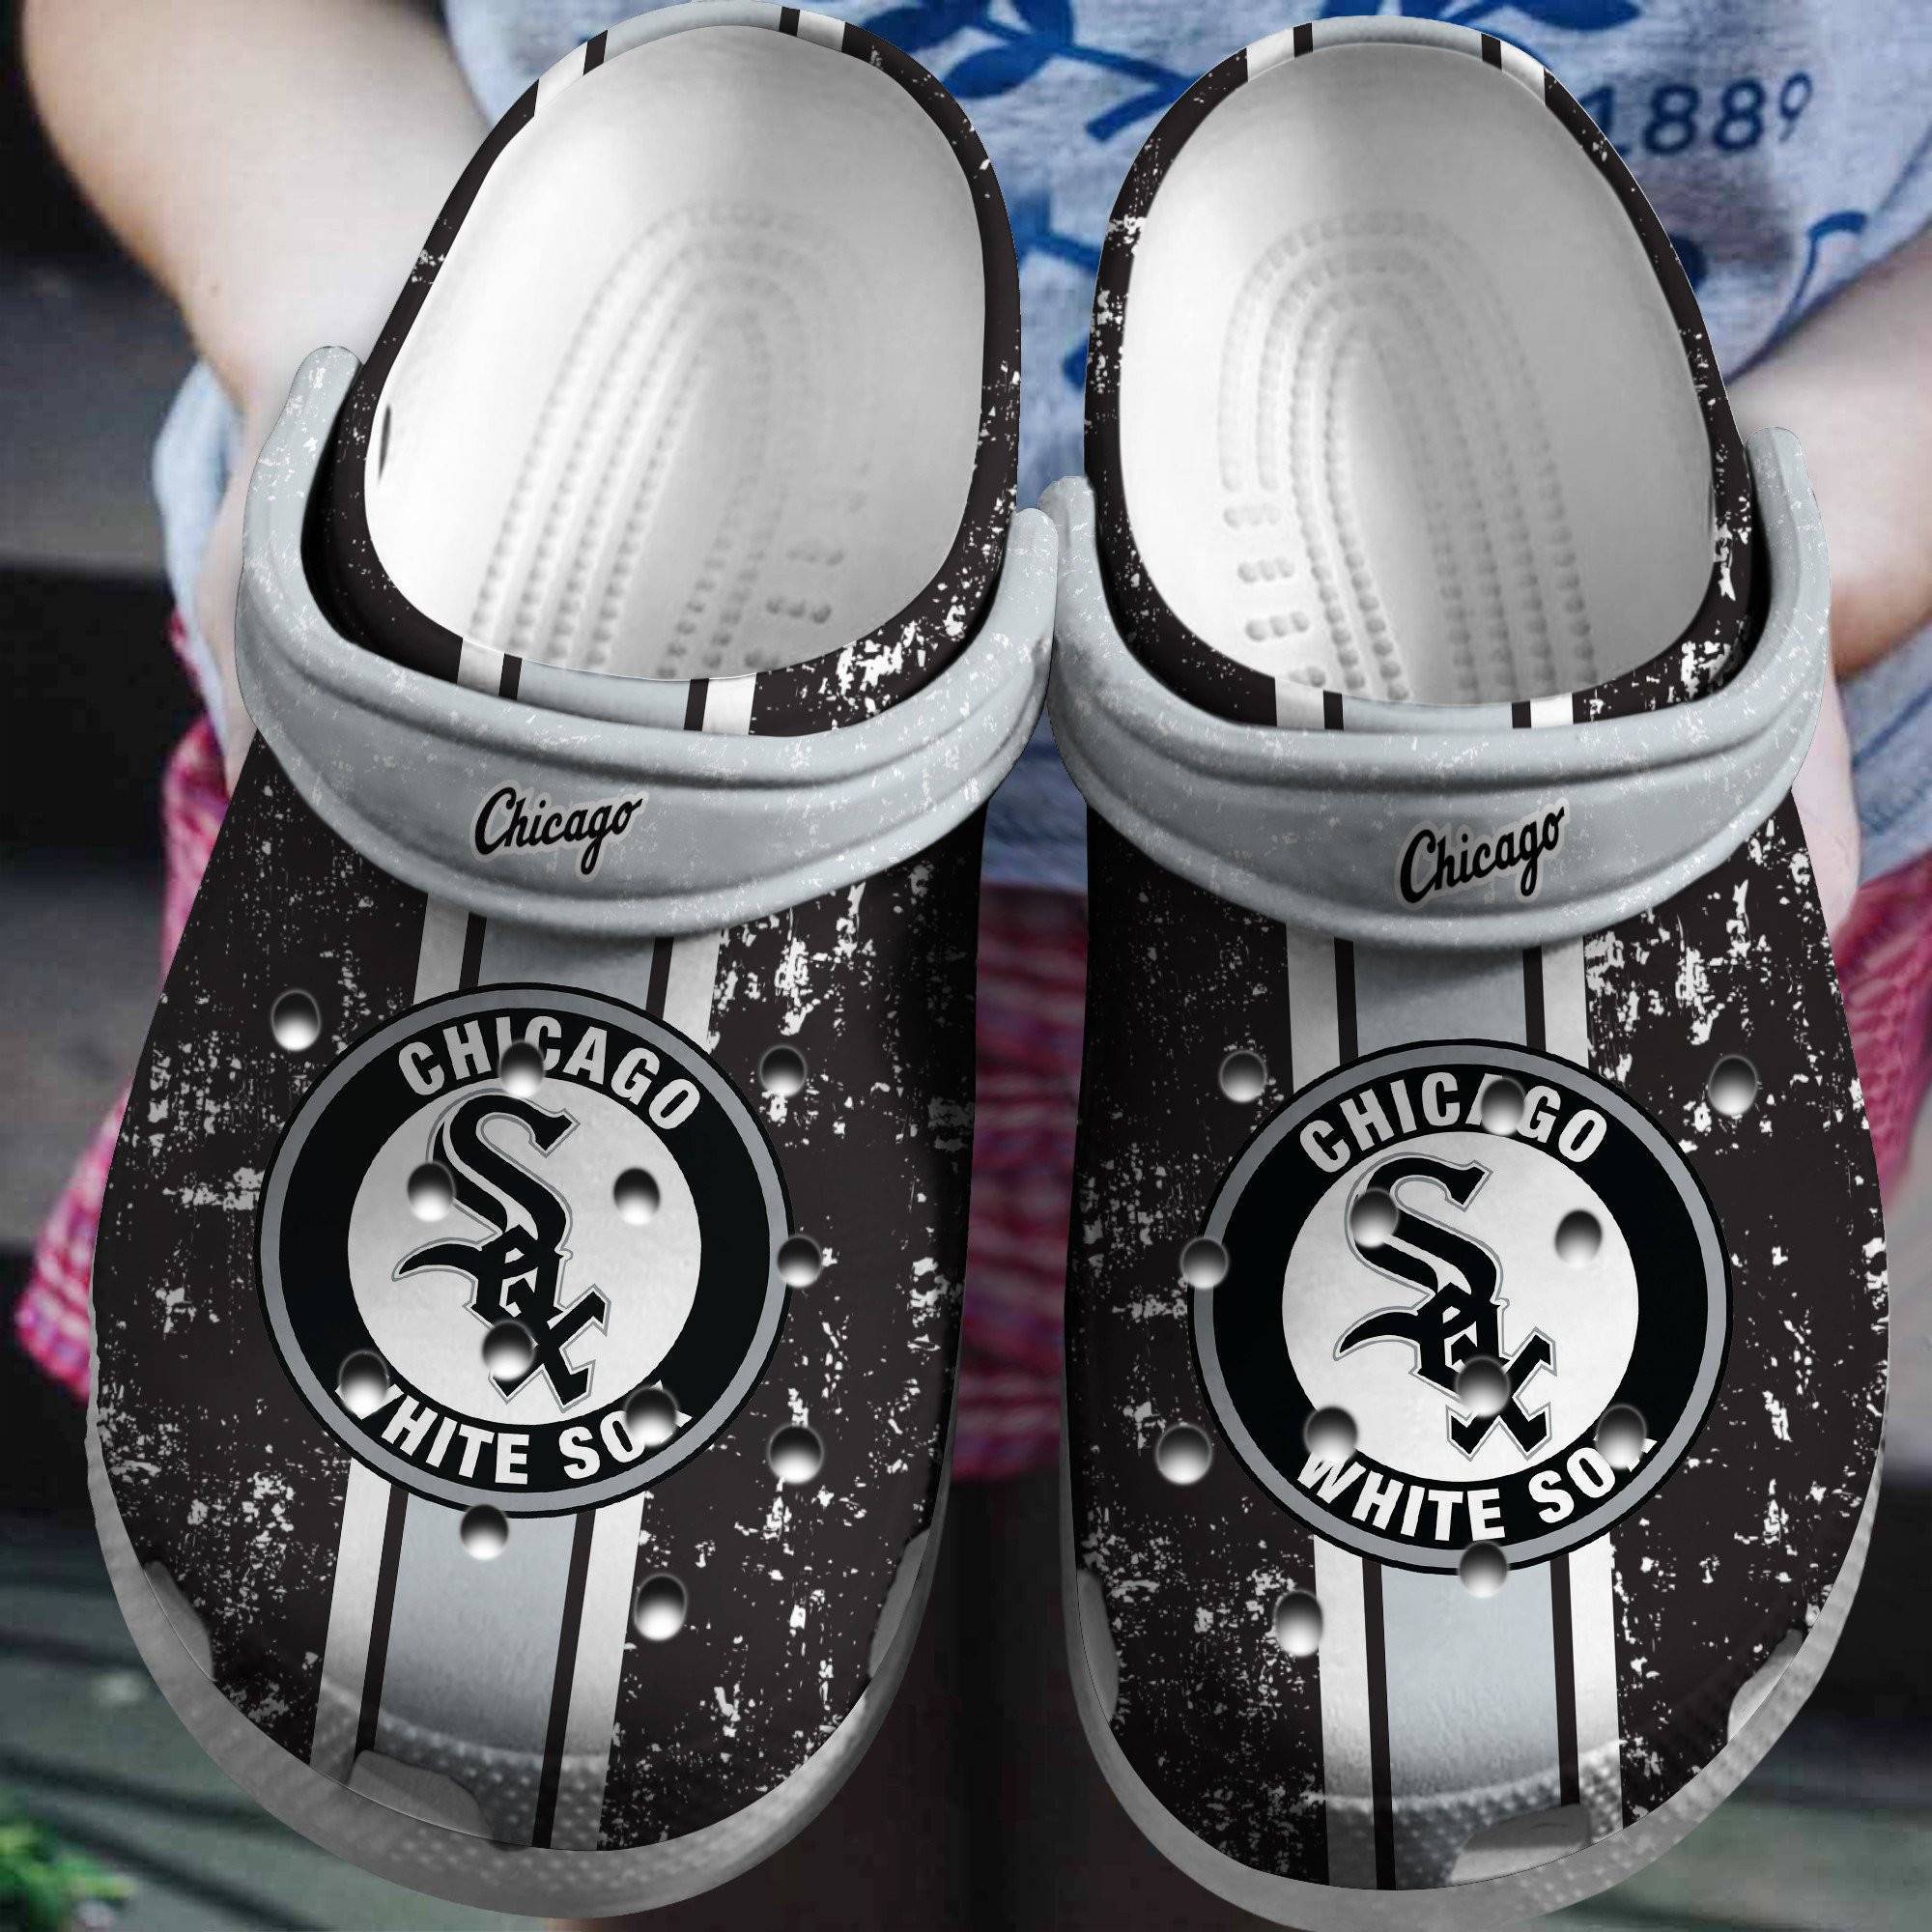 Hot Mlb Team Chicago White Sox Crocss Clog Shoesshoes Trusted Shopping Online In The World